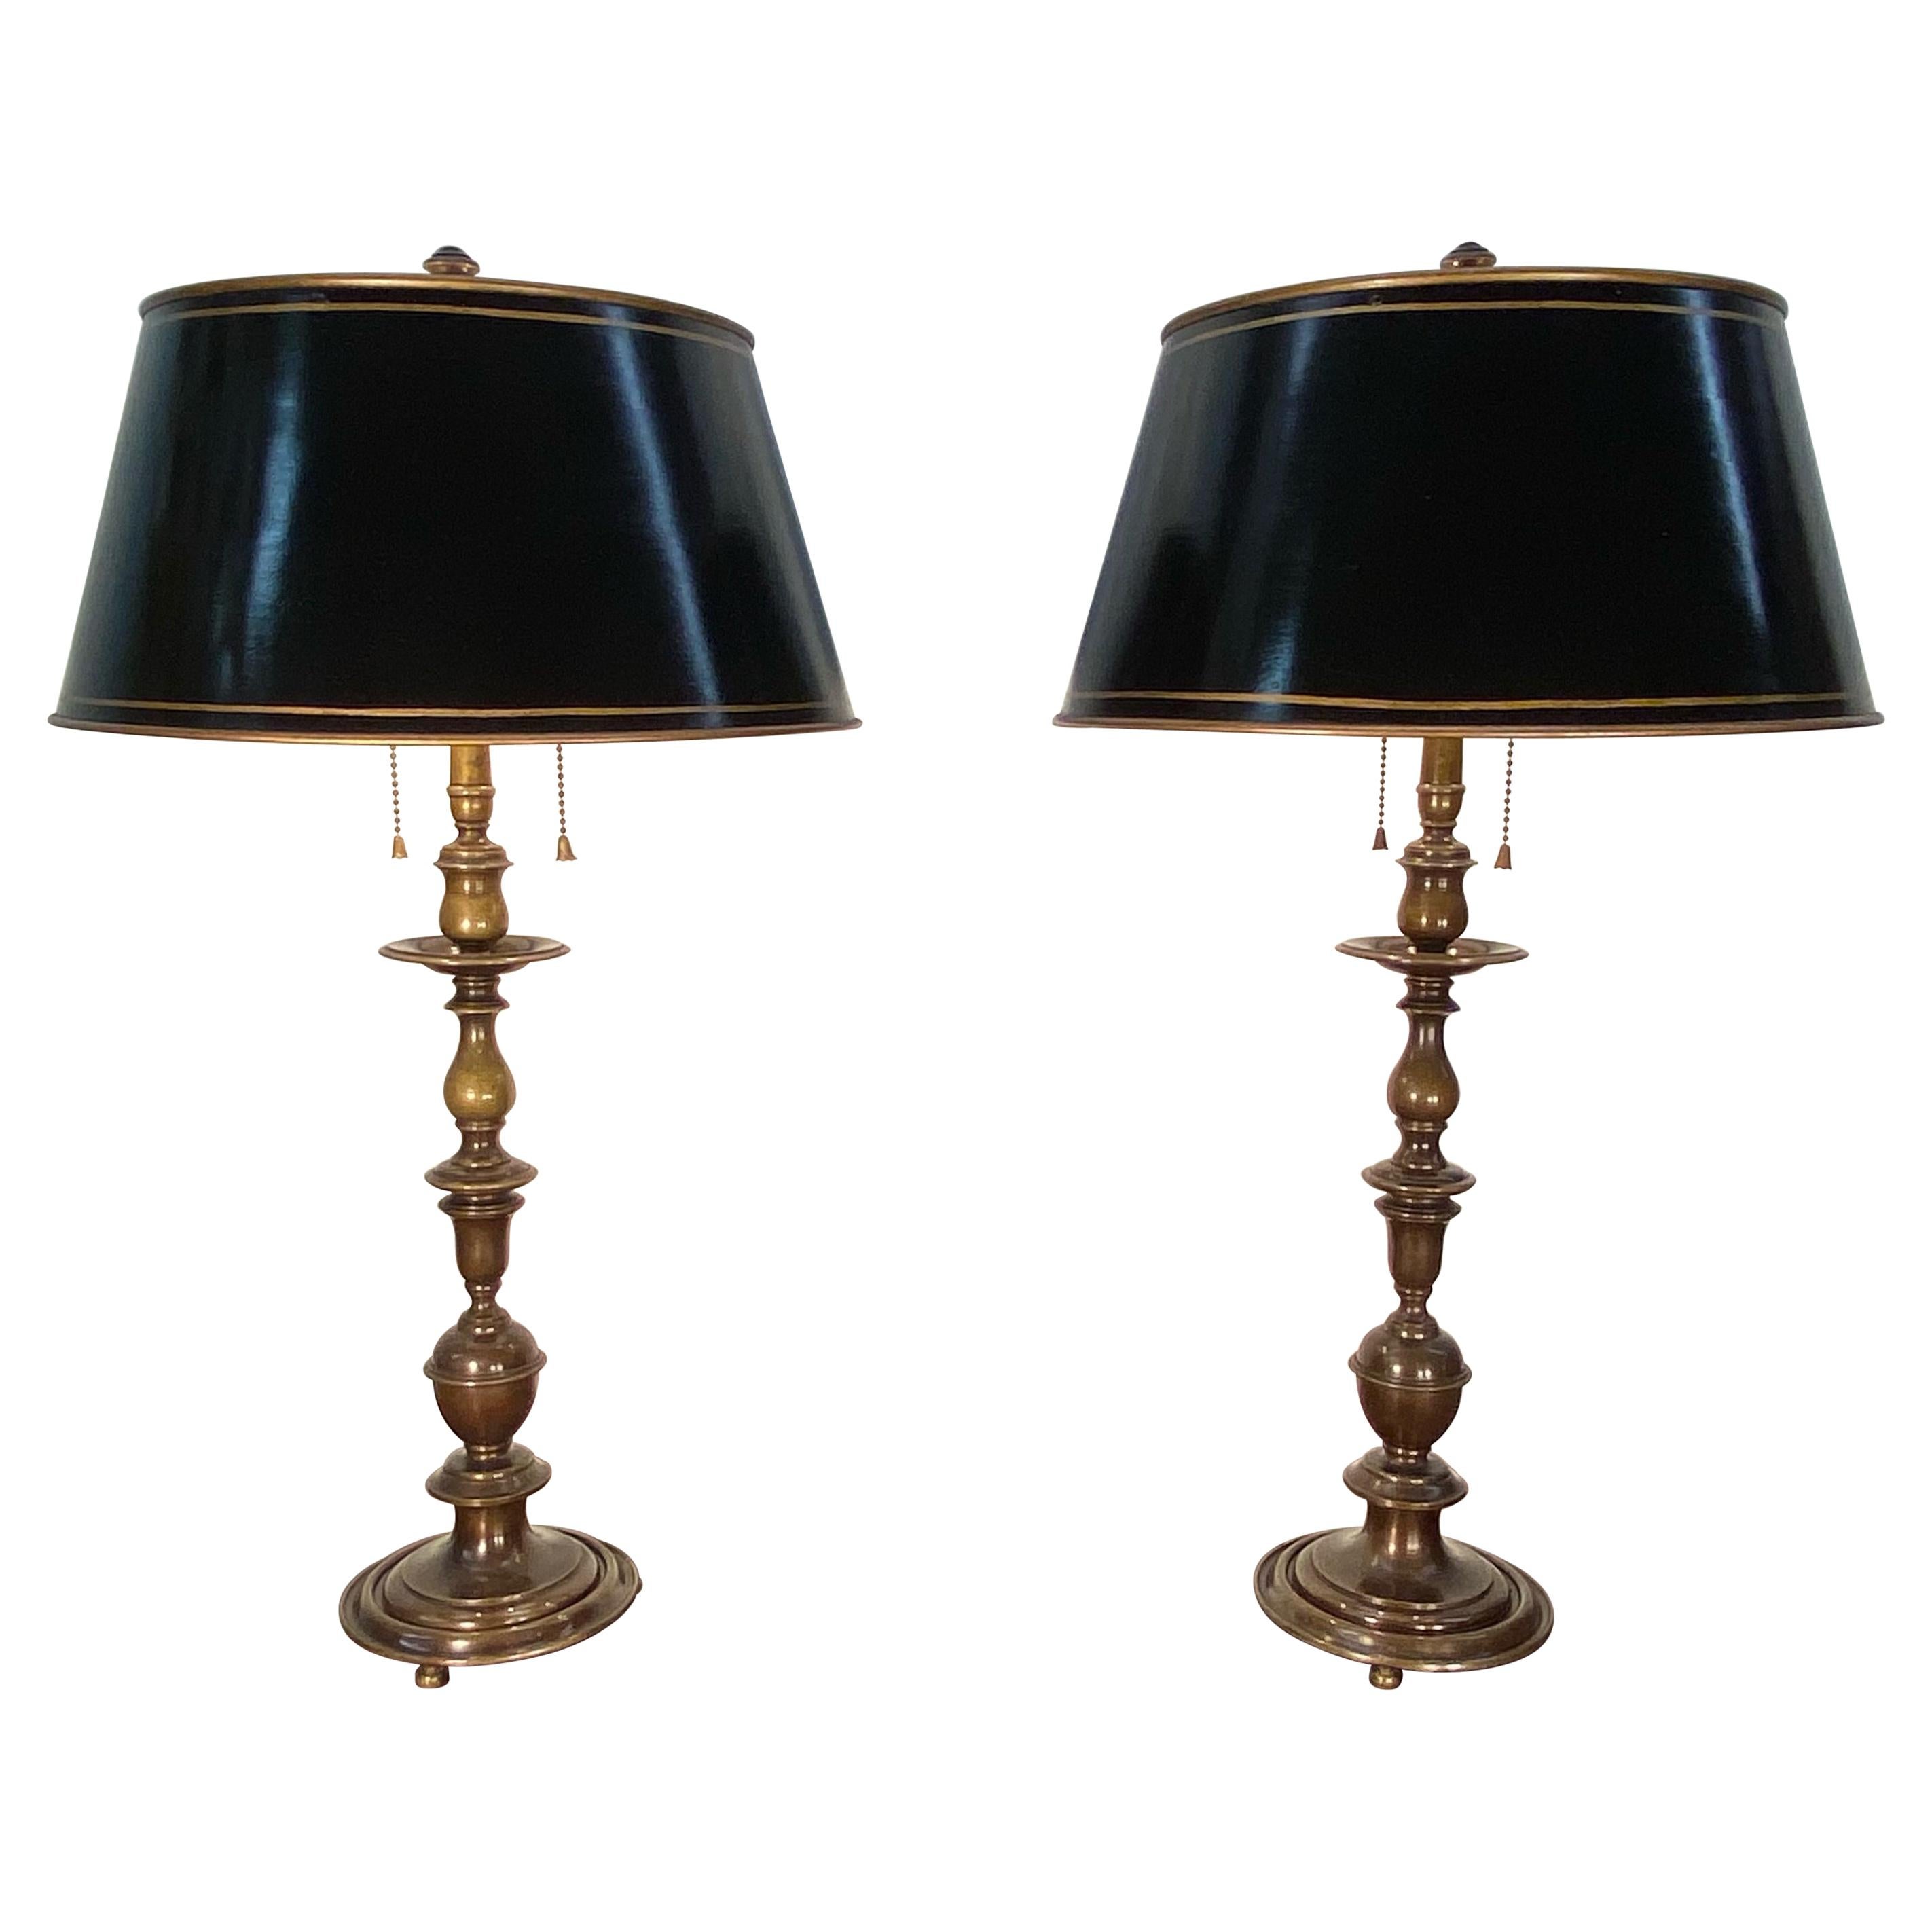 Pair of English Bronze Balustrade Lamps with Tole Shades, Early 20th Century